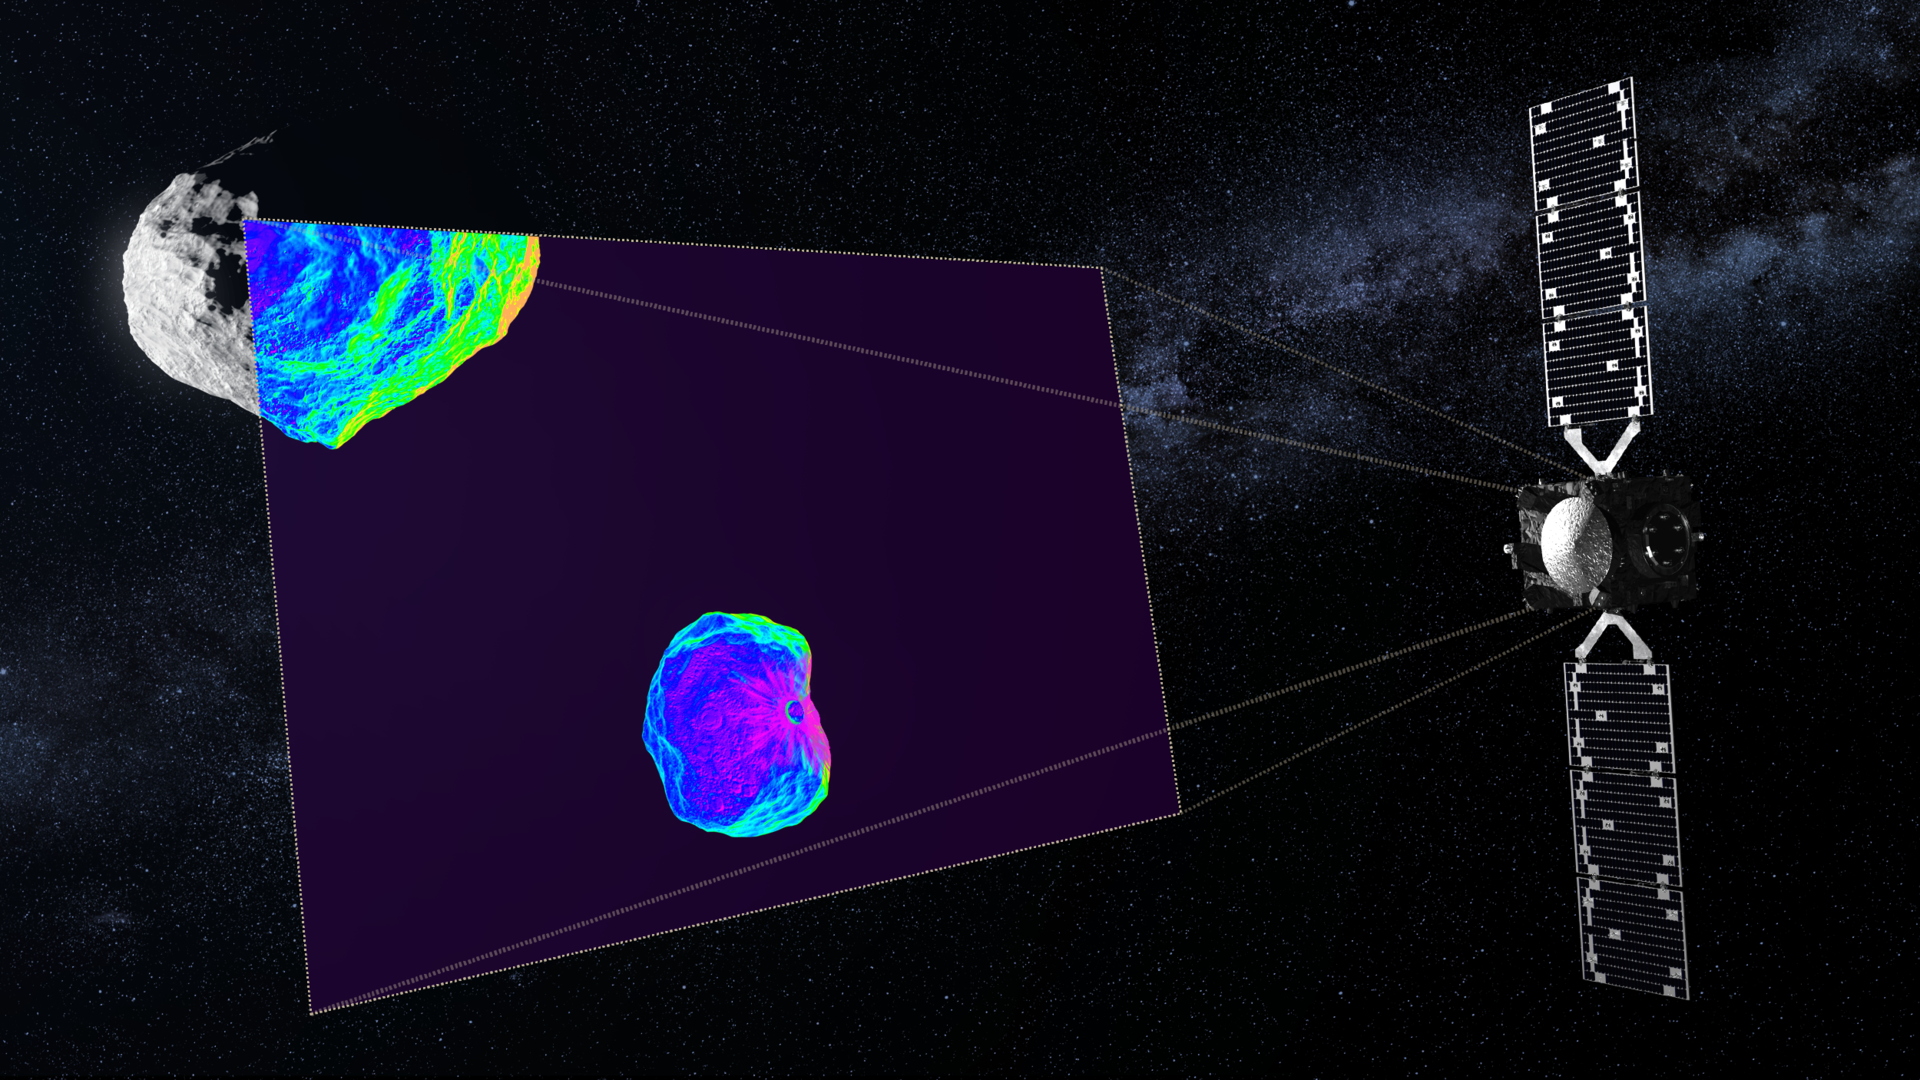 Infrared imaging of asteroids